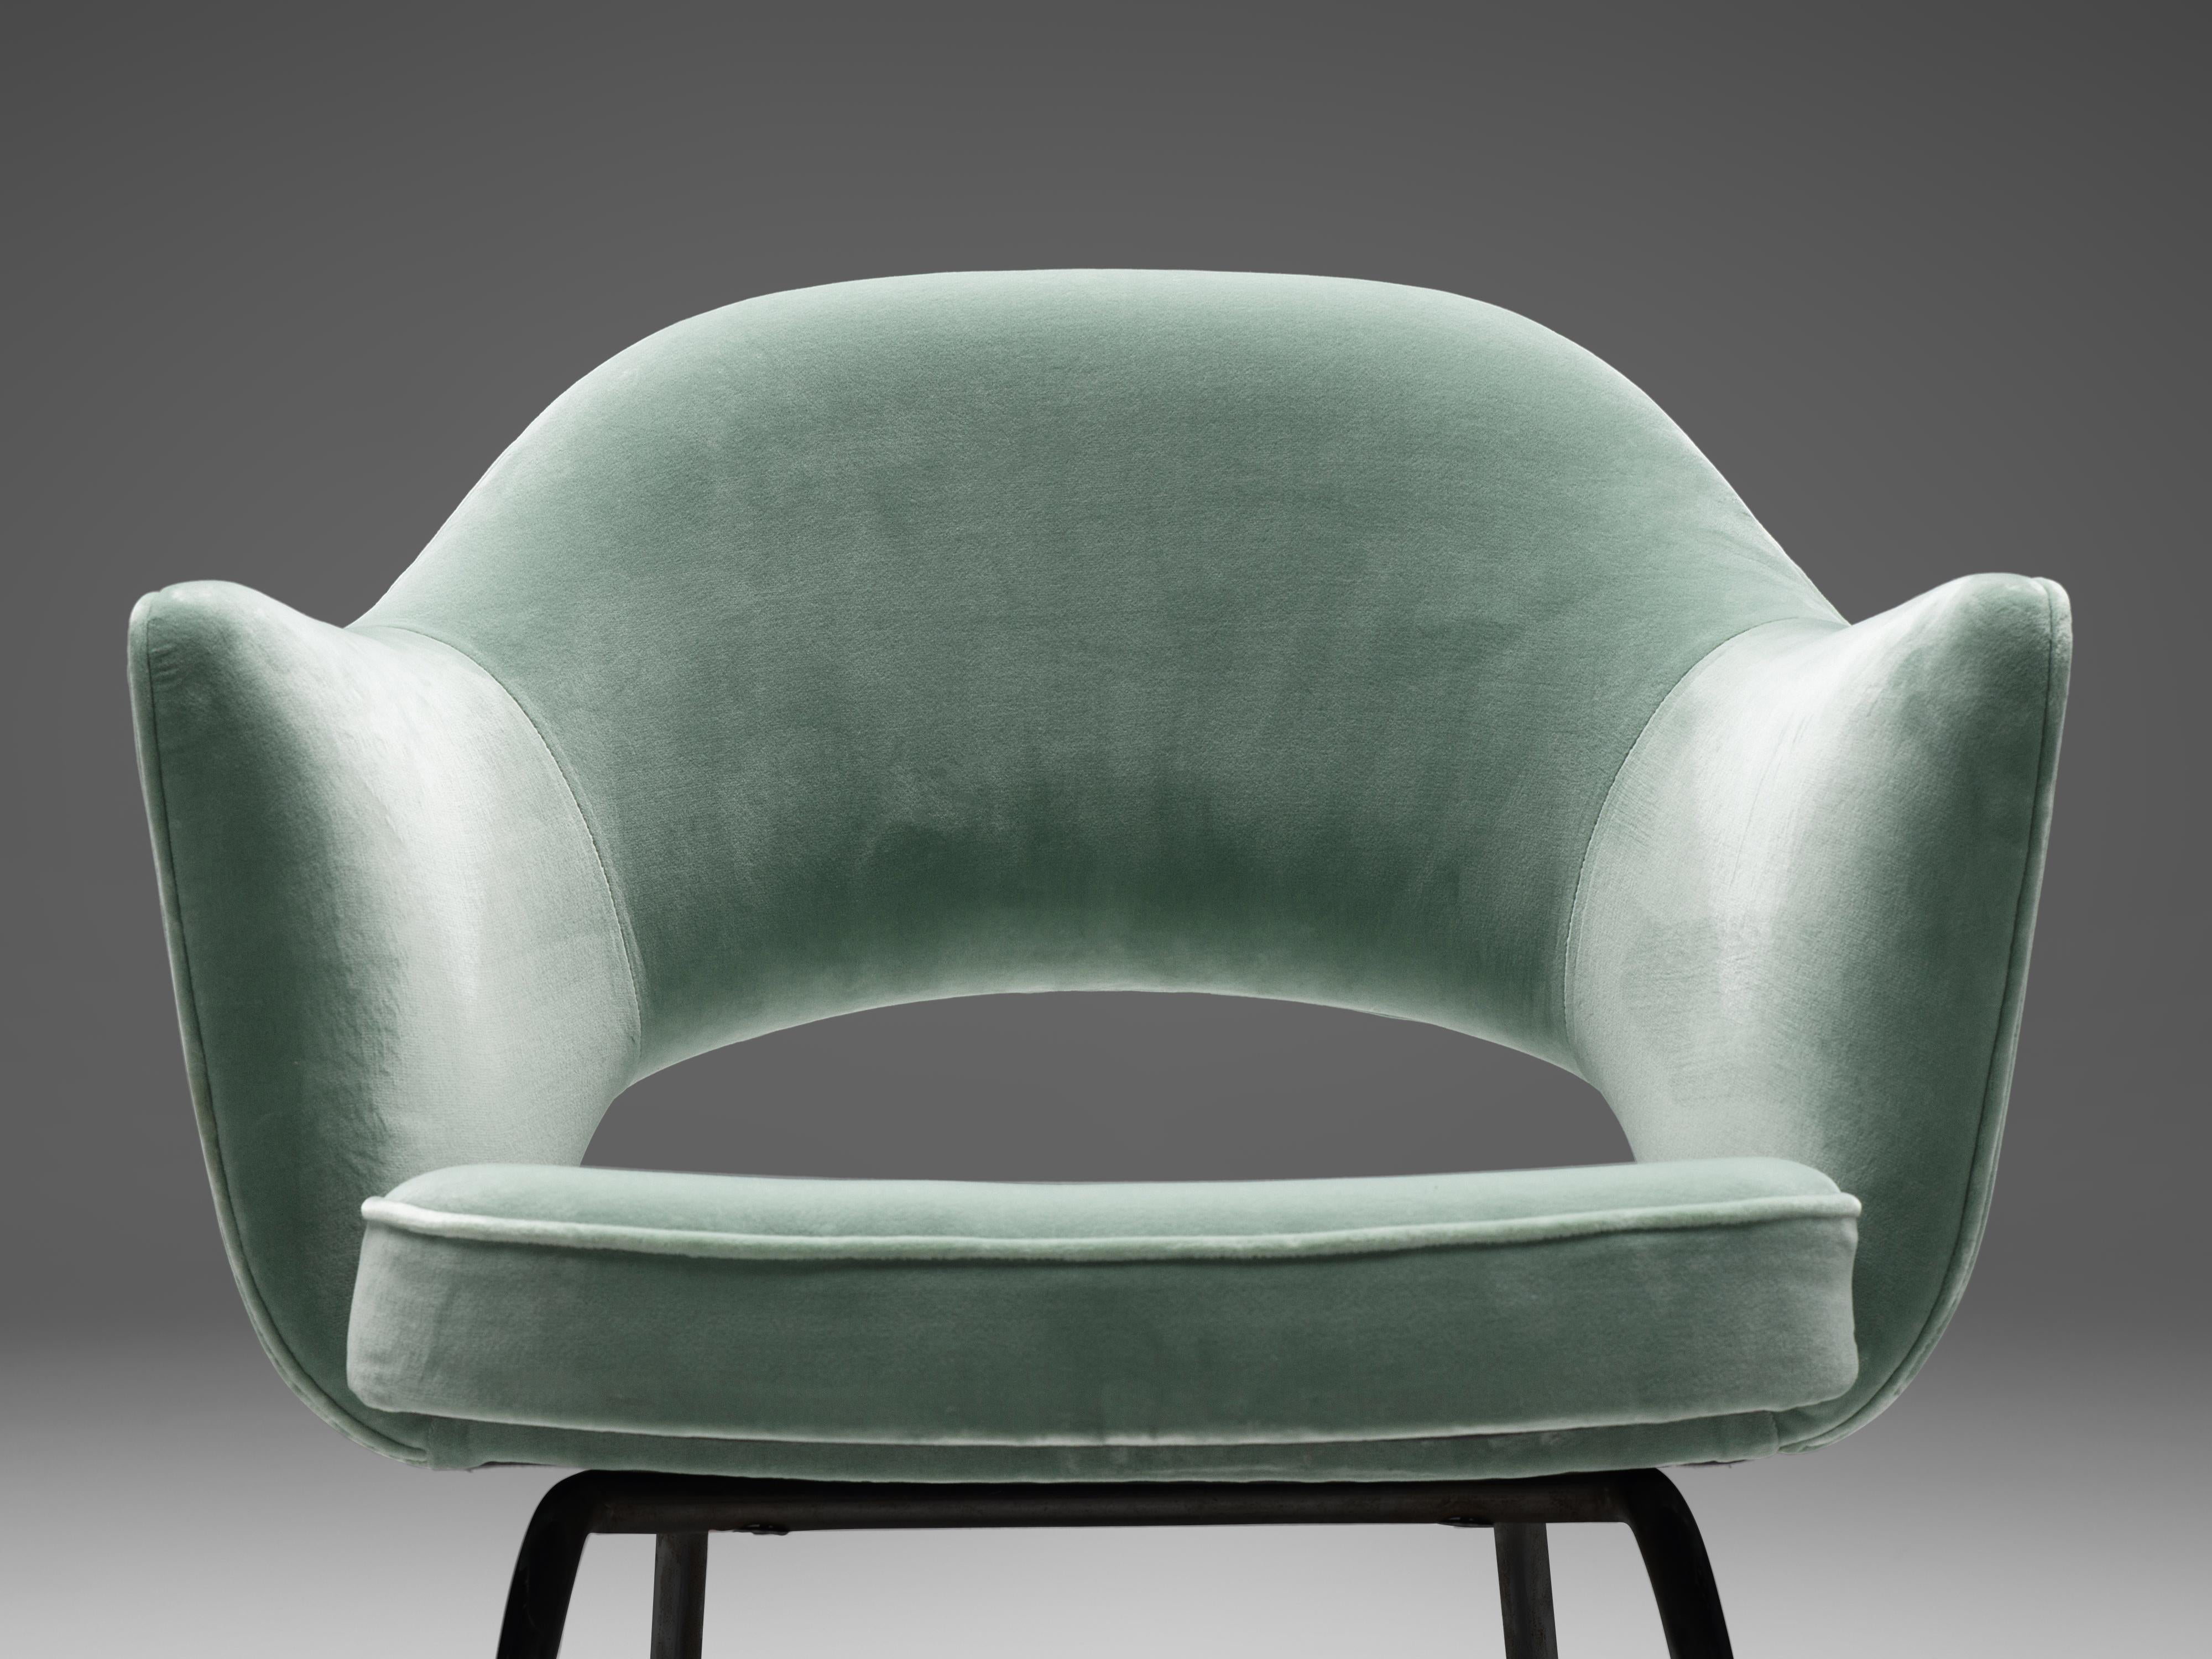 Eero Saarinen for Knoll International, pair of armchairs, in metal and velvet, United States, 1970s. 

Pair of iconic armchair designed by Eero Saarinen for Knoll International. A fluid, sculptural form. This organic shaped chair has a timeless and